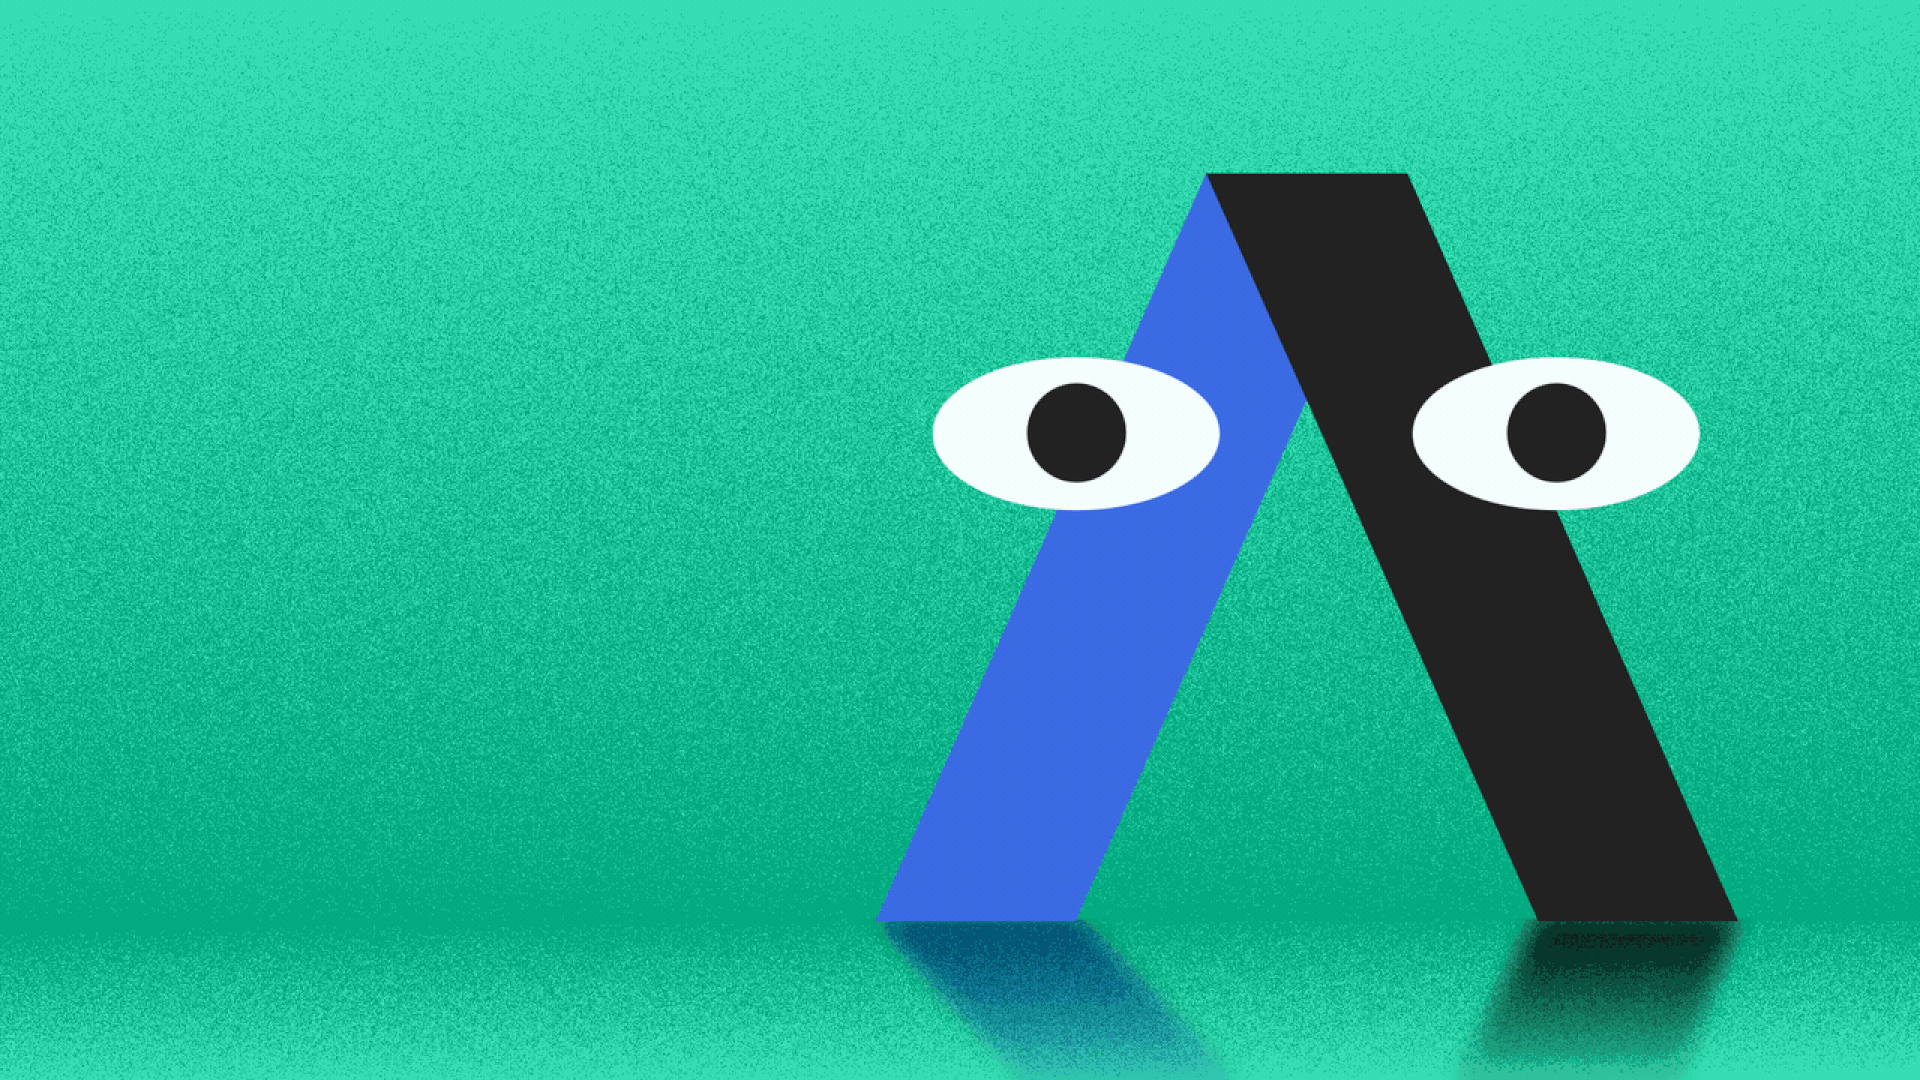 Illustration of the Axios logo with eyes on the top of the A, which look around before looking straight ahead and squinting.